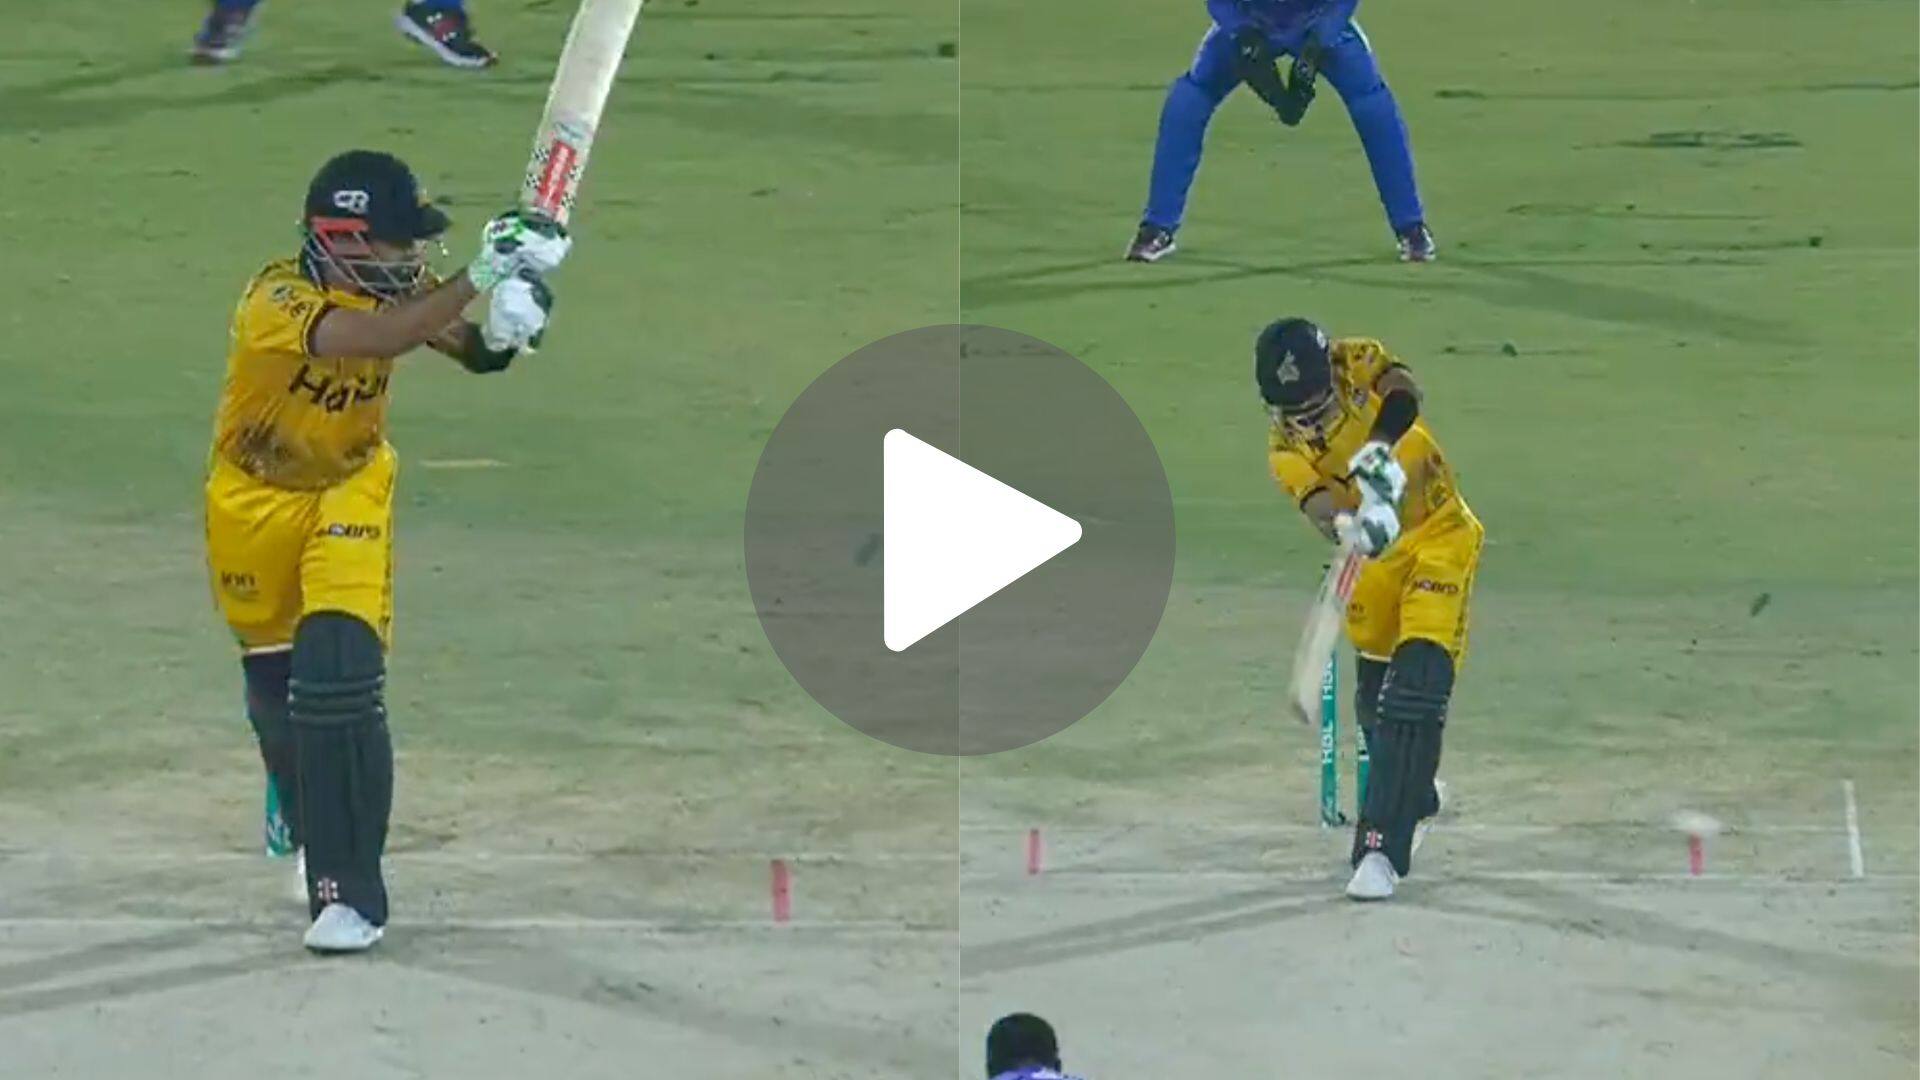 [Watch] Babar Azam Unleashes Wrist Magic With Glorious Boundaries In PSL Qualifier